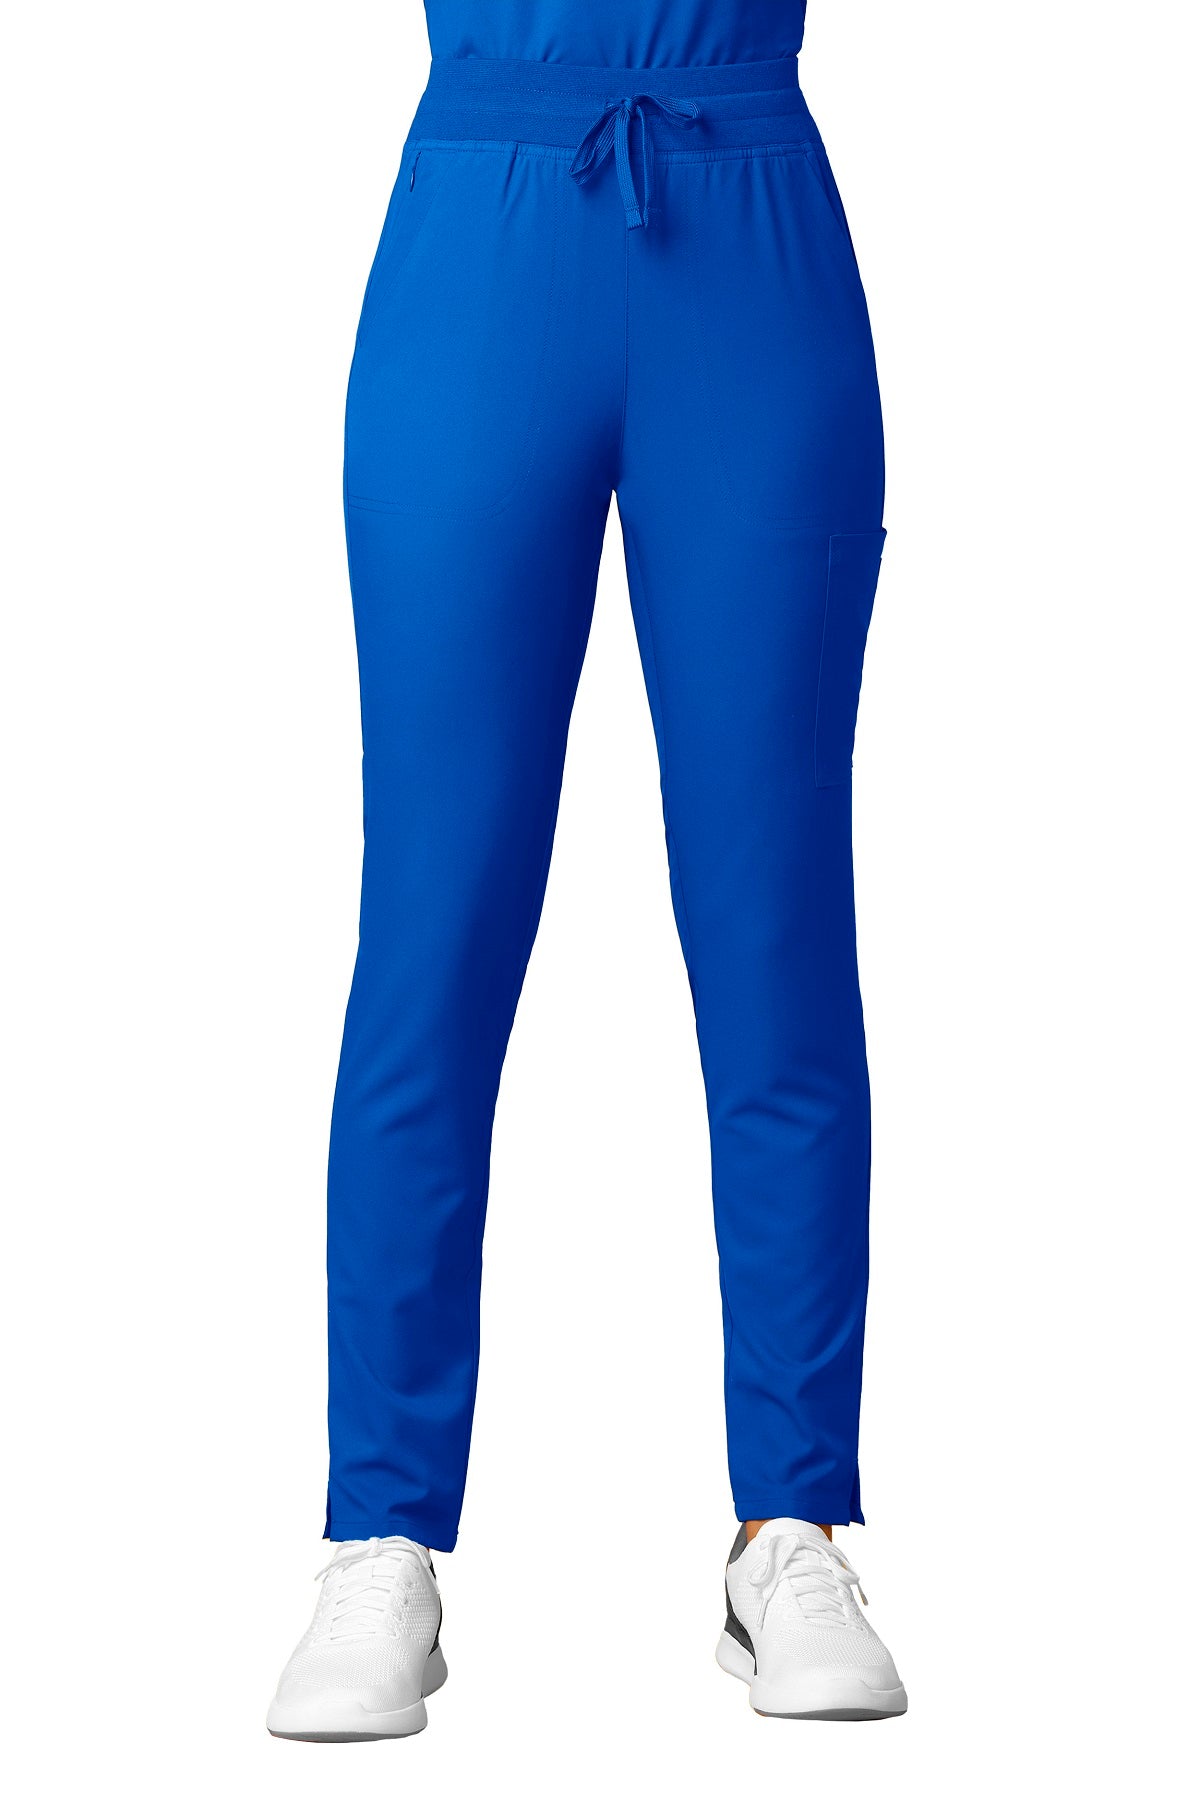 WonderWink Scrub Pants Thrive Cargo Straight Slim regular length in royal at Parker's Clothing and Shoes.